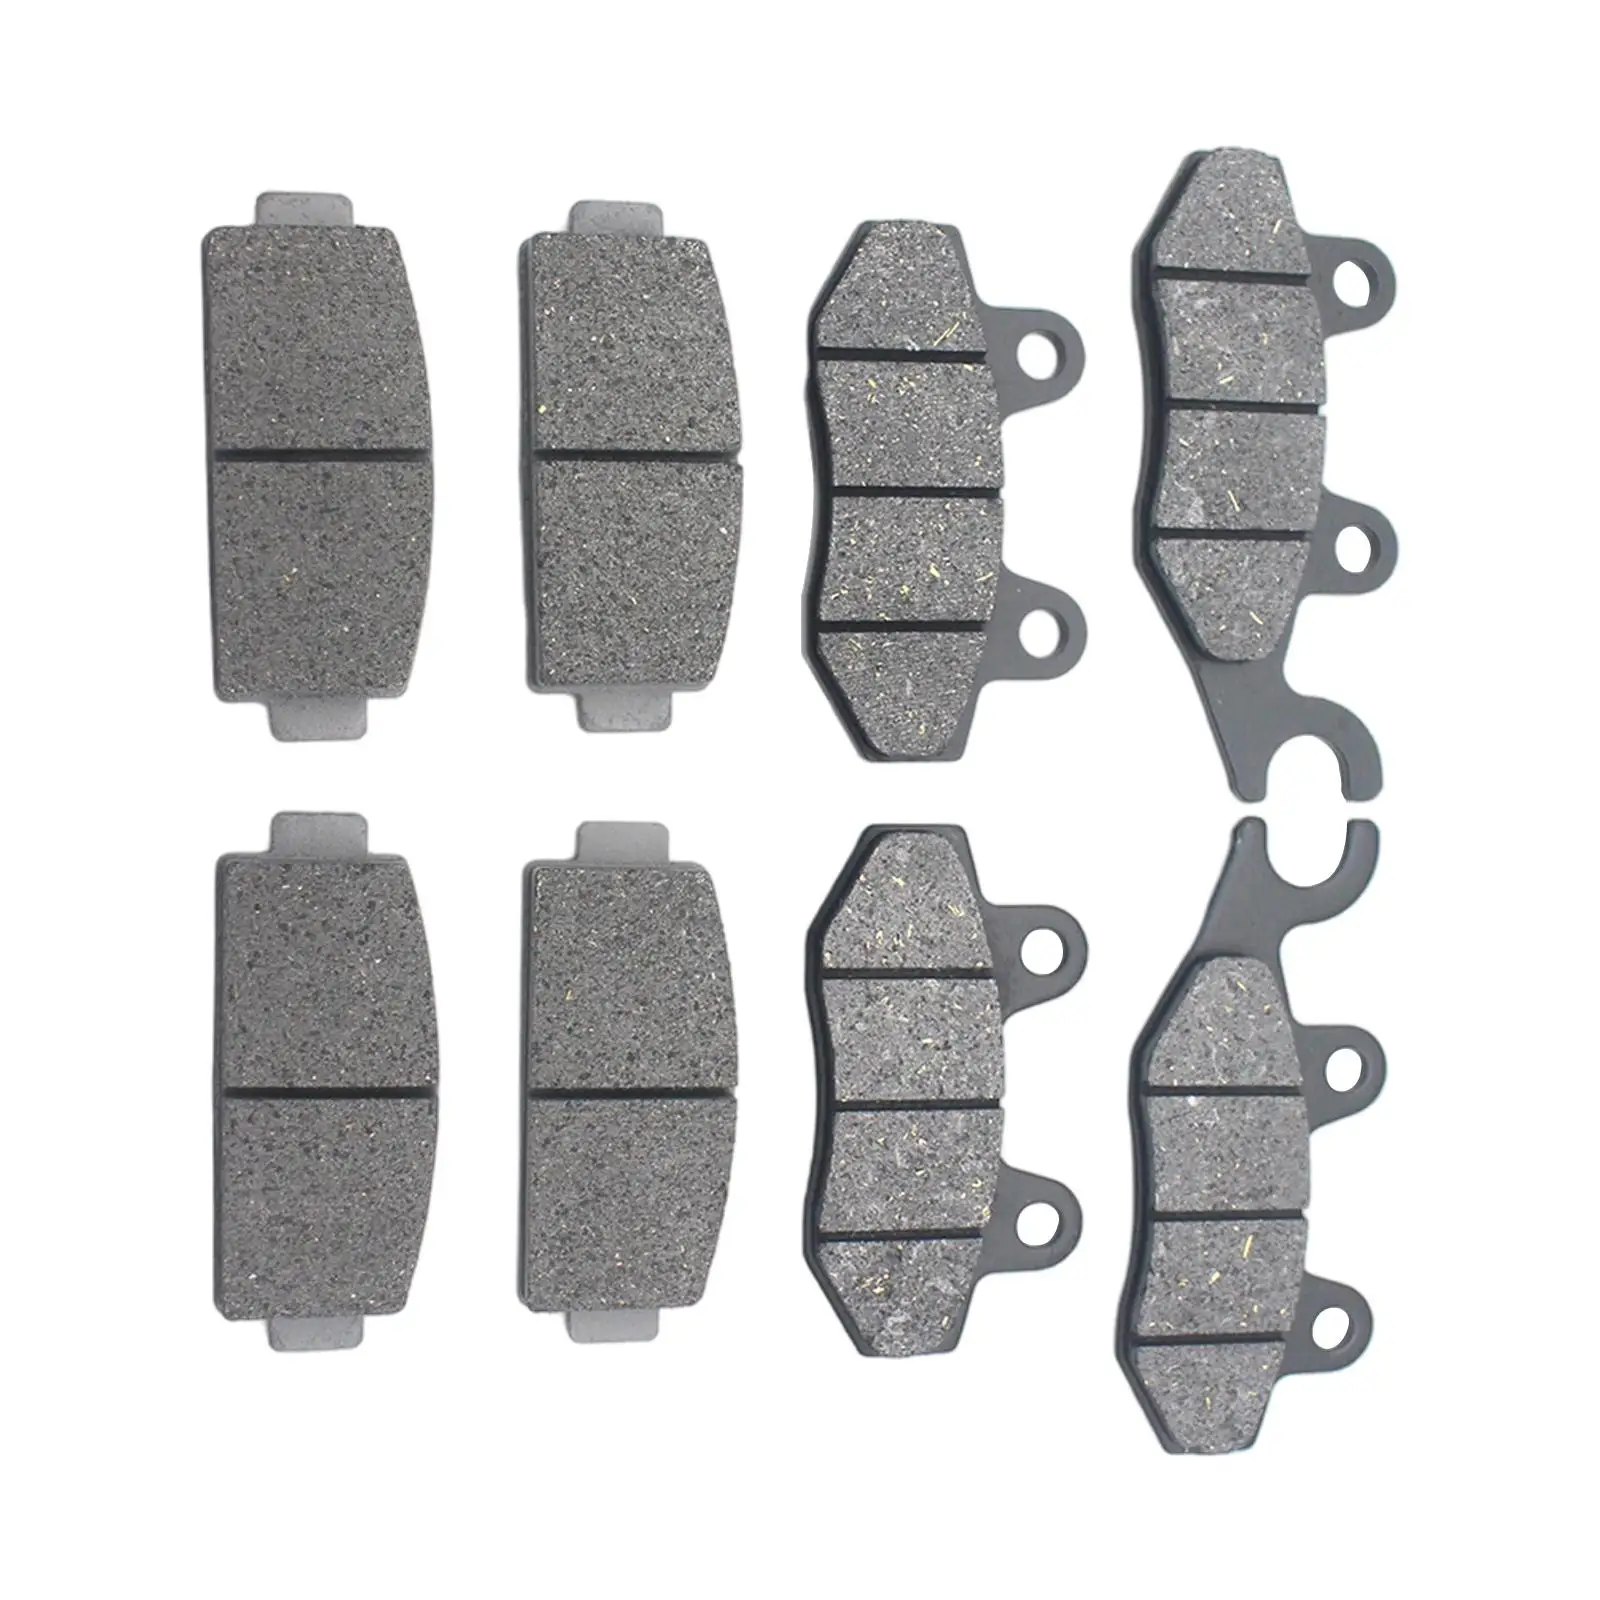 Front Rear Motorcycle Brake Pads for US Z-Force 550 2015 for CF 800 Z-Force Z8 EX 2014-2017 for CF 500 600 800 Fit for CF Moto